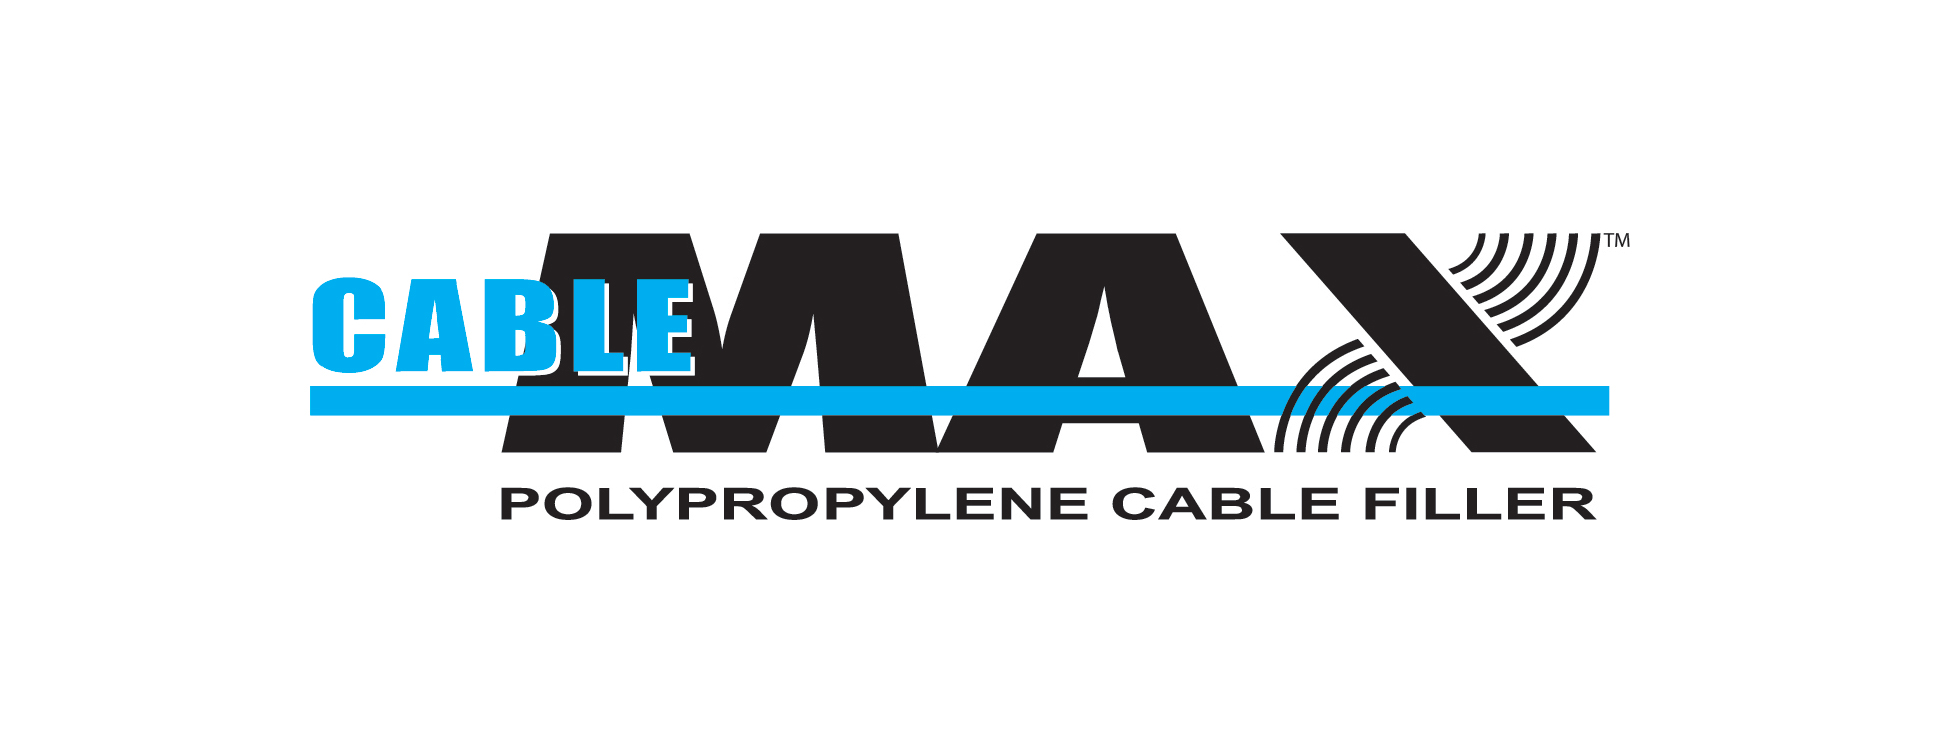 CableMax™ Cable Filler